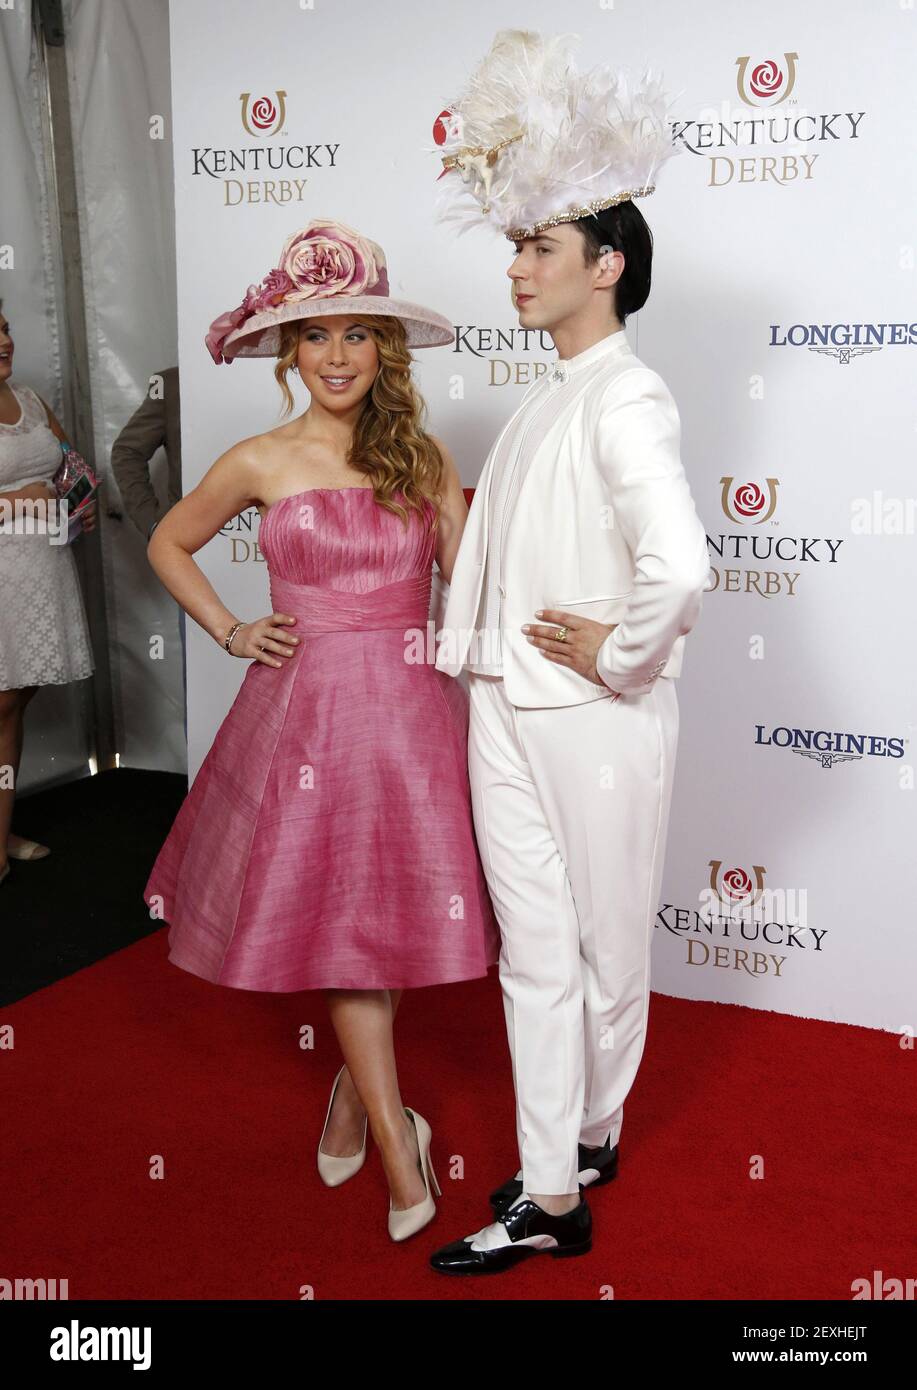 Former figure skating stars Tara Lipinski and Johnny Weir appear on the red carpet before the 140th running of the Kentucky Derby at Churchill Downs in Louisville, Ky., on May 3, 2014. (Photo by Amy Wallot/Lexington Herald-Leader/TNS/Sipa USA) Stock Photo